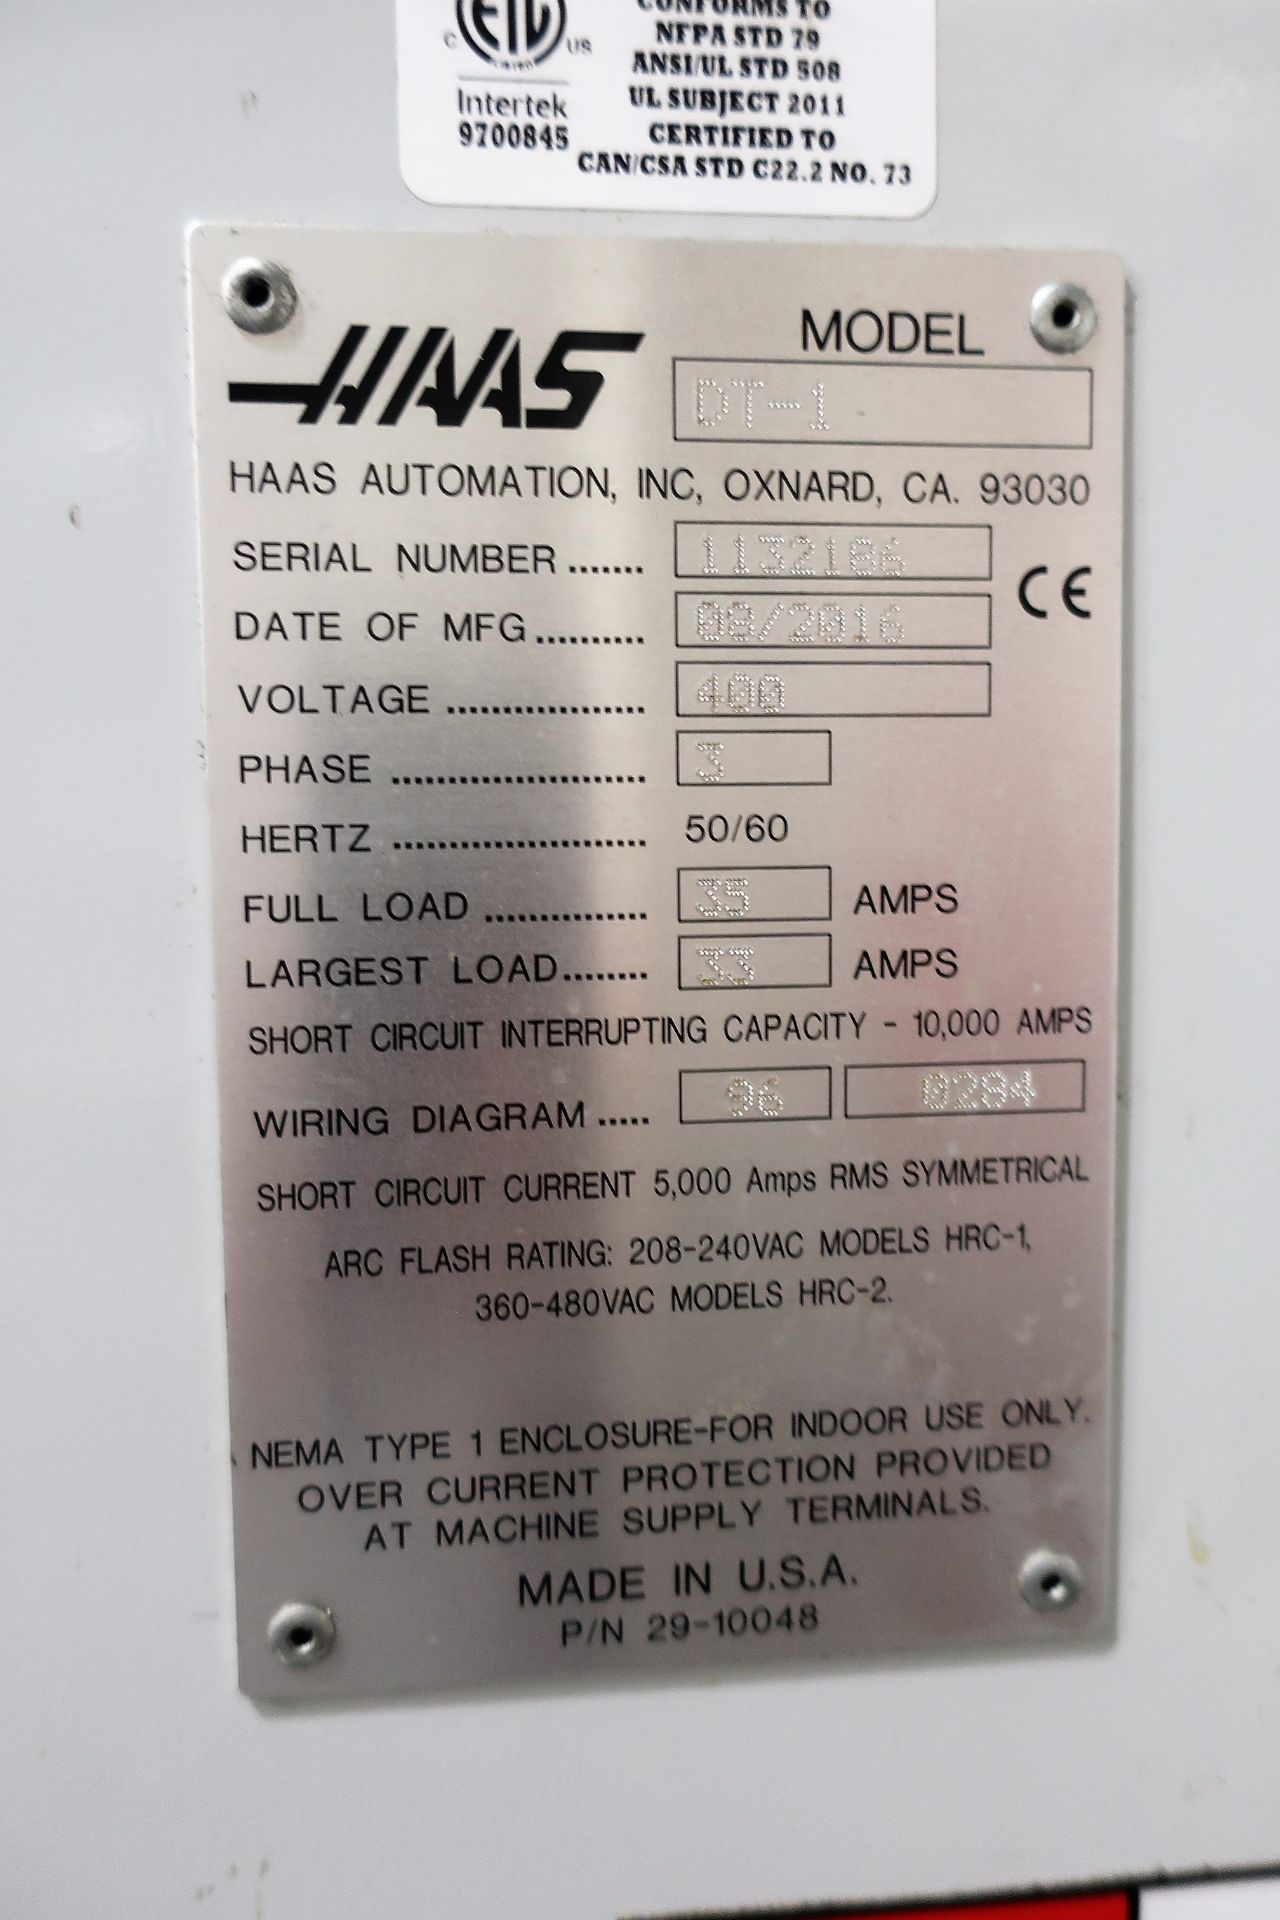 HAAS DT-1 4-AXIS CNC DRILL/TAP VERTICAL MACHINING CENTER, S/N 1131126, NEW 2016 - Image 10 of 10